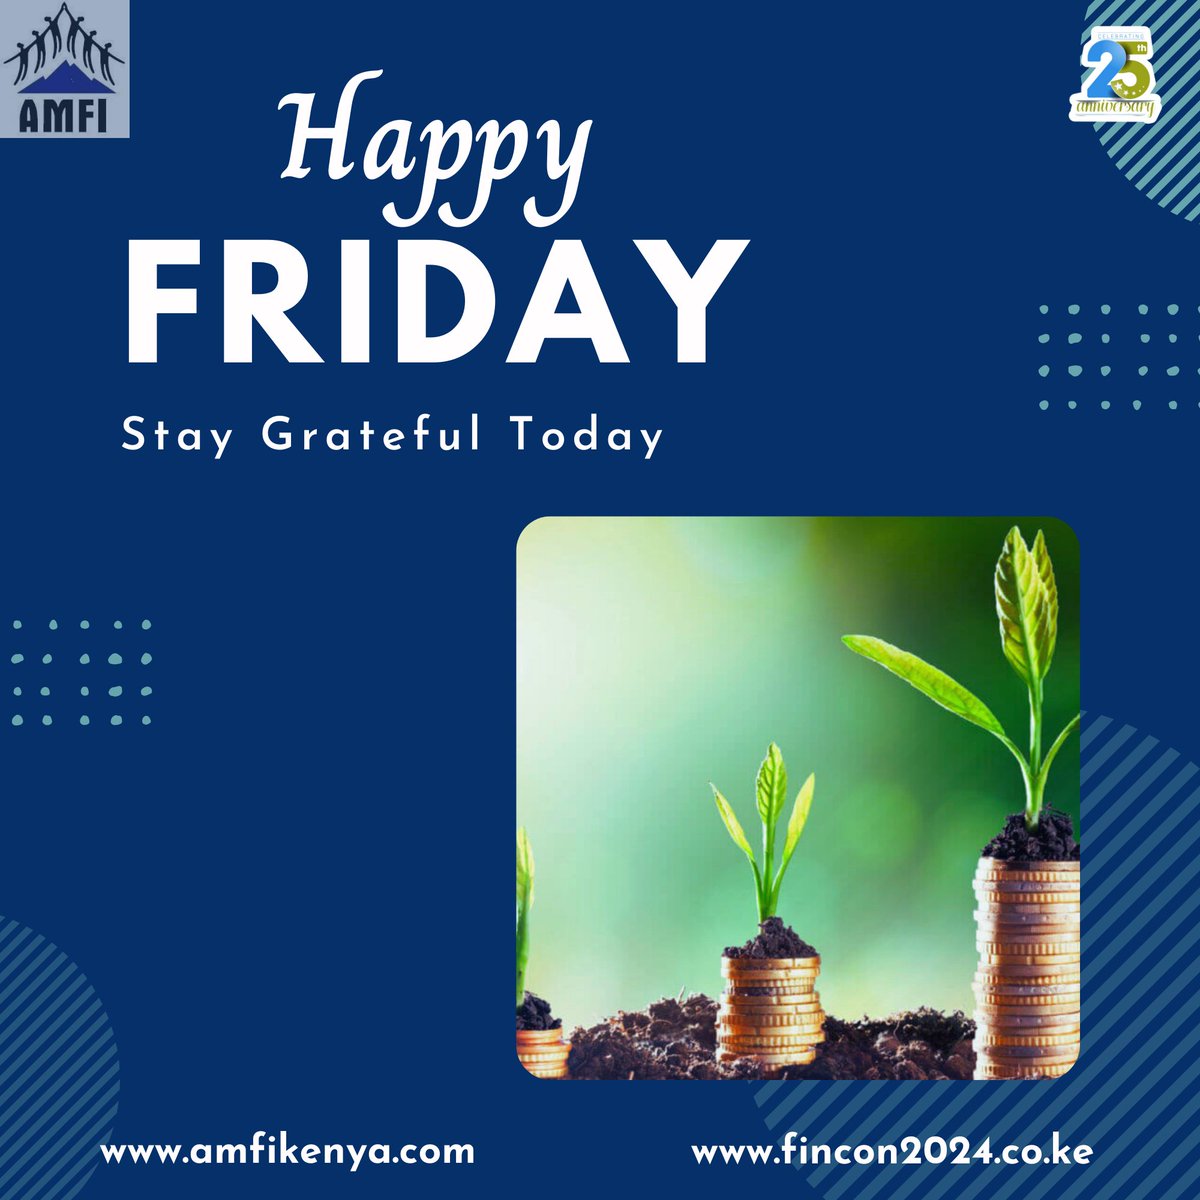 Happy Friday! Wrapping up a productive week and looking forward to the weekend ahead. #FINCON2024 #AmfiCelebrates25Years #EndOfWeek #TeamEffort